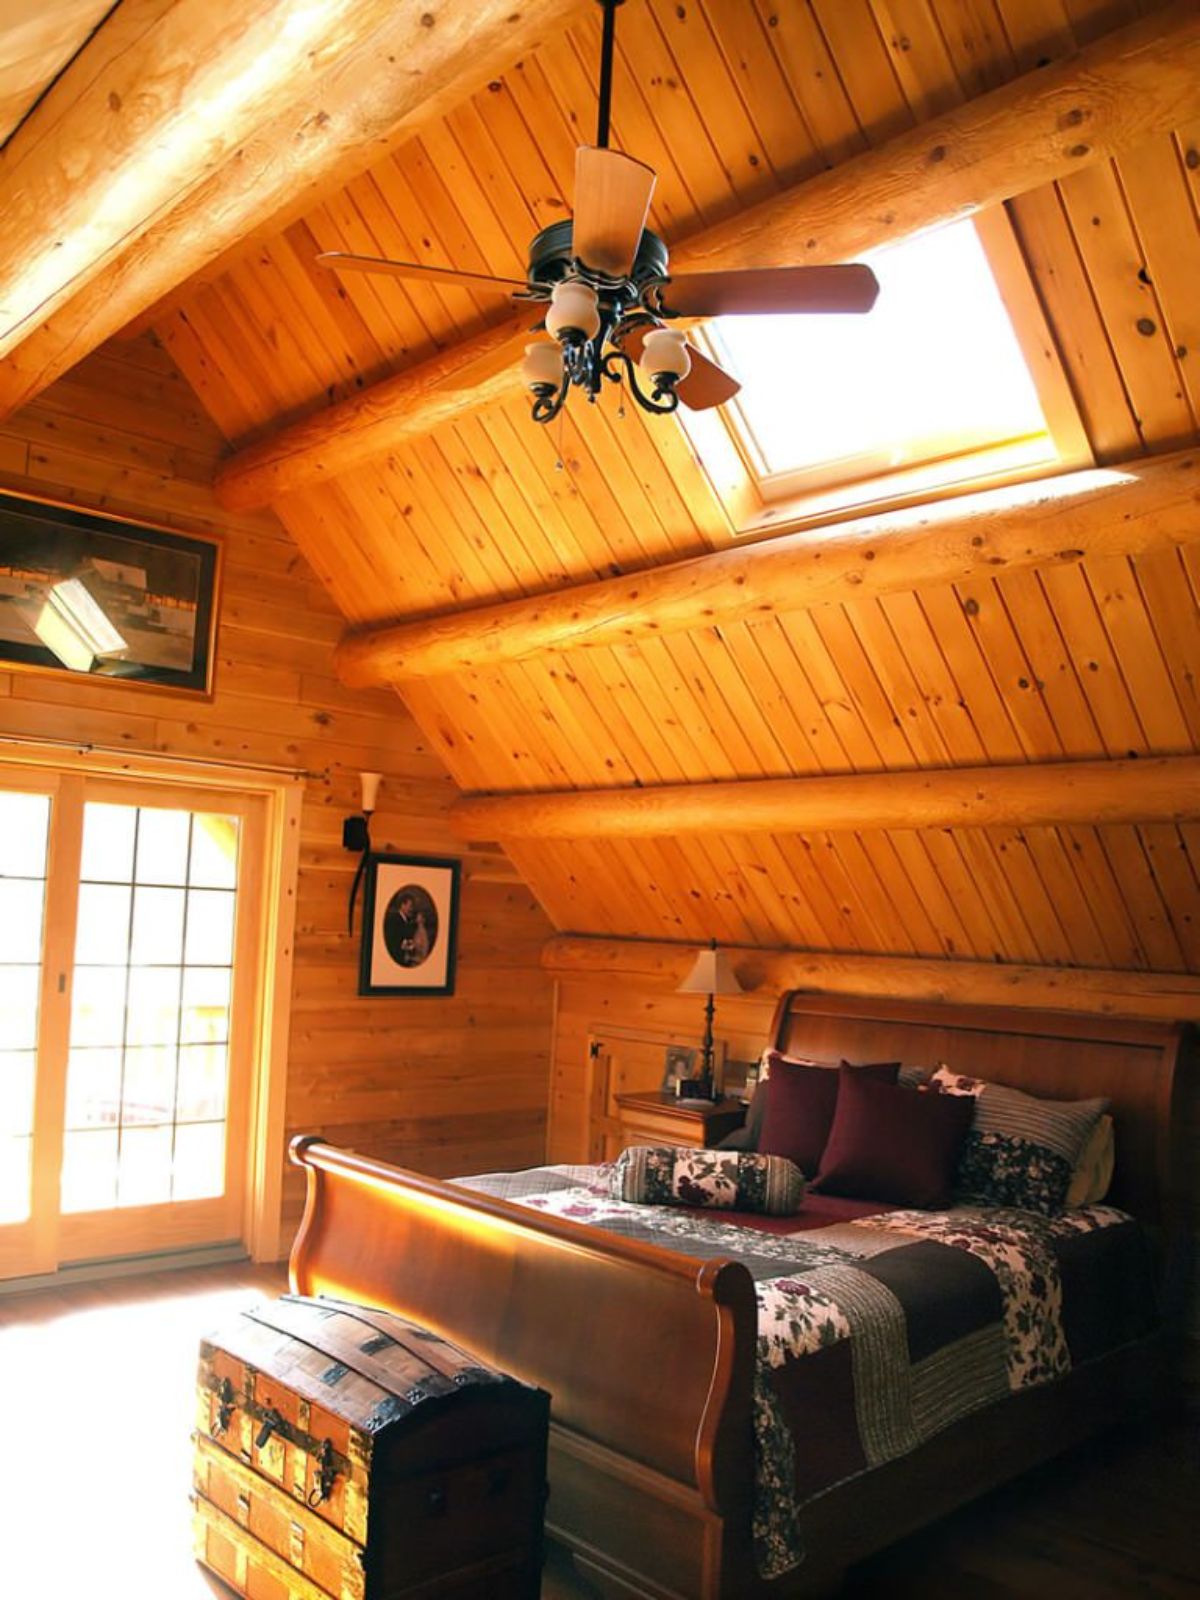 loft in log cabin with sleigh bed under ceiling fan